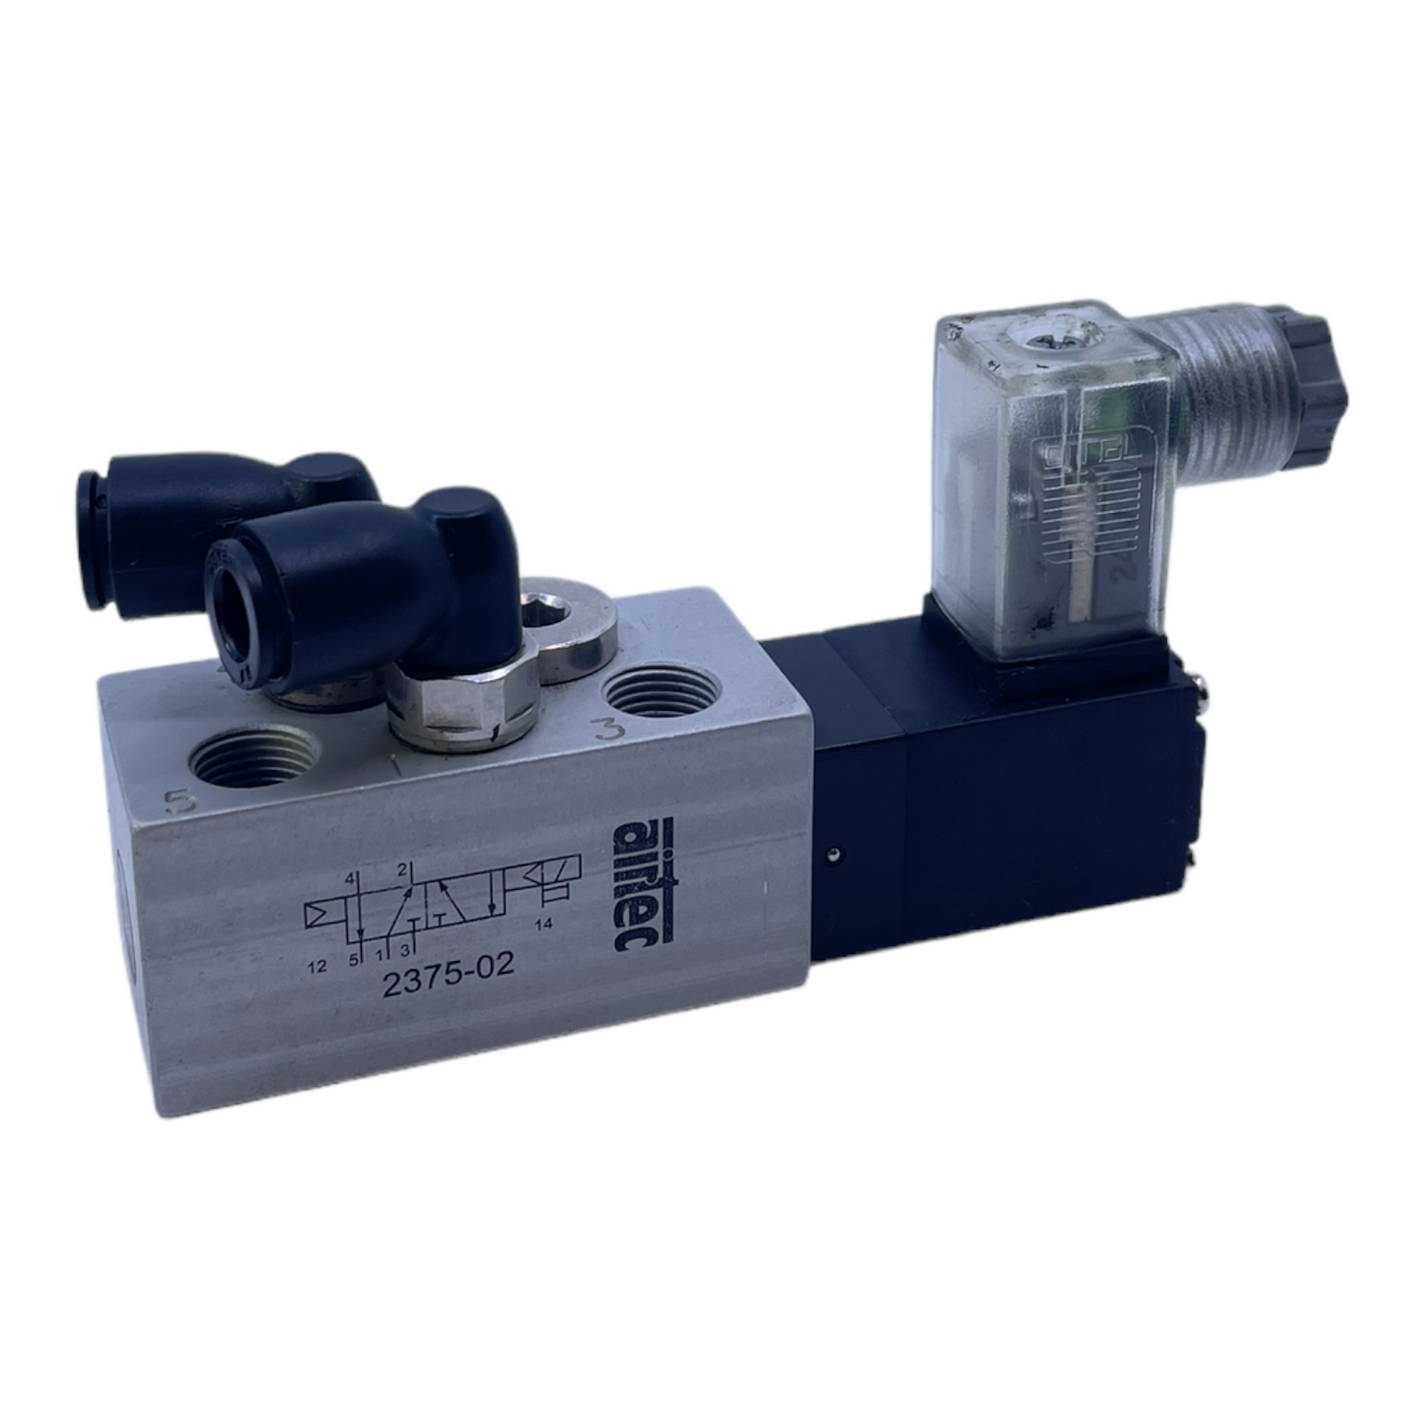 Airtec 2375-02 Solenoid valve 24V 2W 84mA for industrial use Solenoid valve